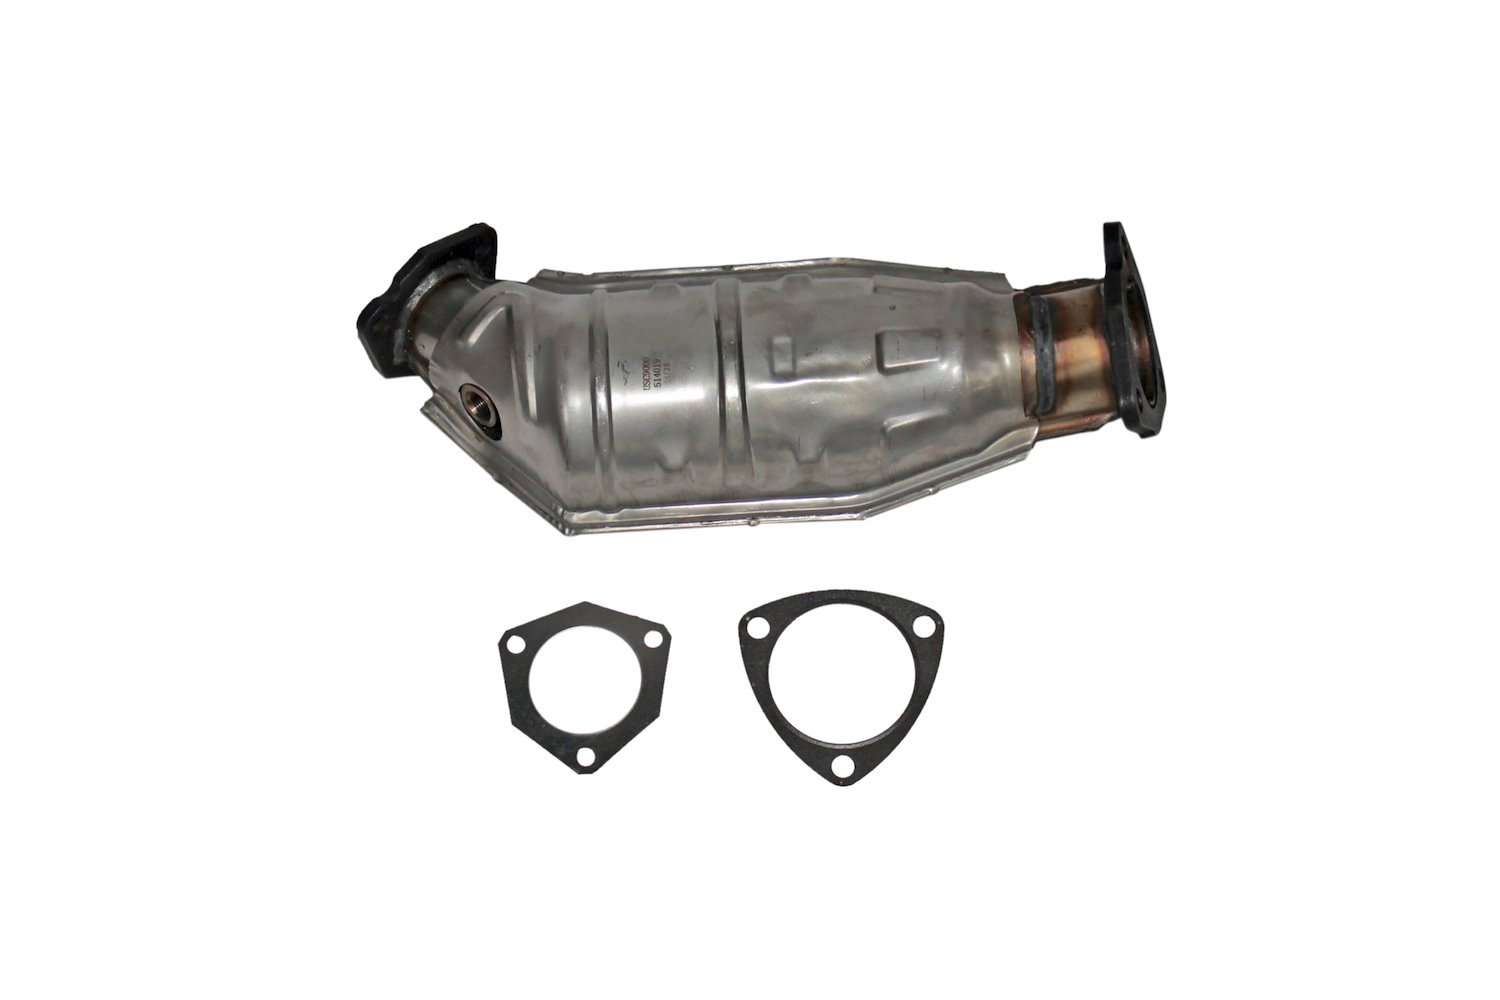 Catalytic Converter Fits Select 1997-2005 Audi A4 Models w/1.8L Turbocharged 4 cyl. Eng. [Front]